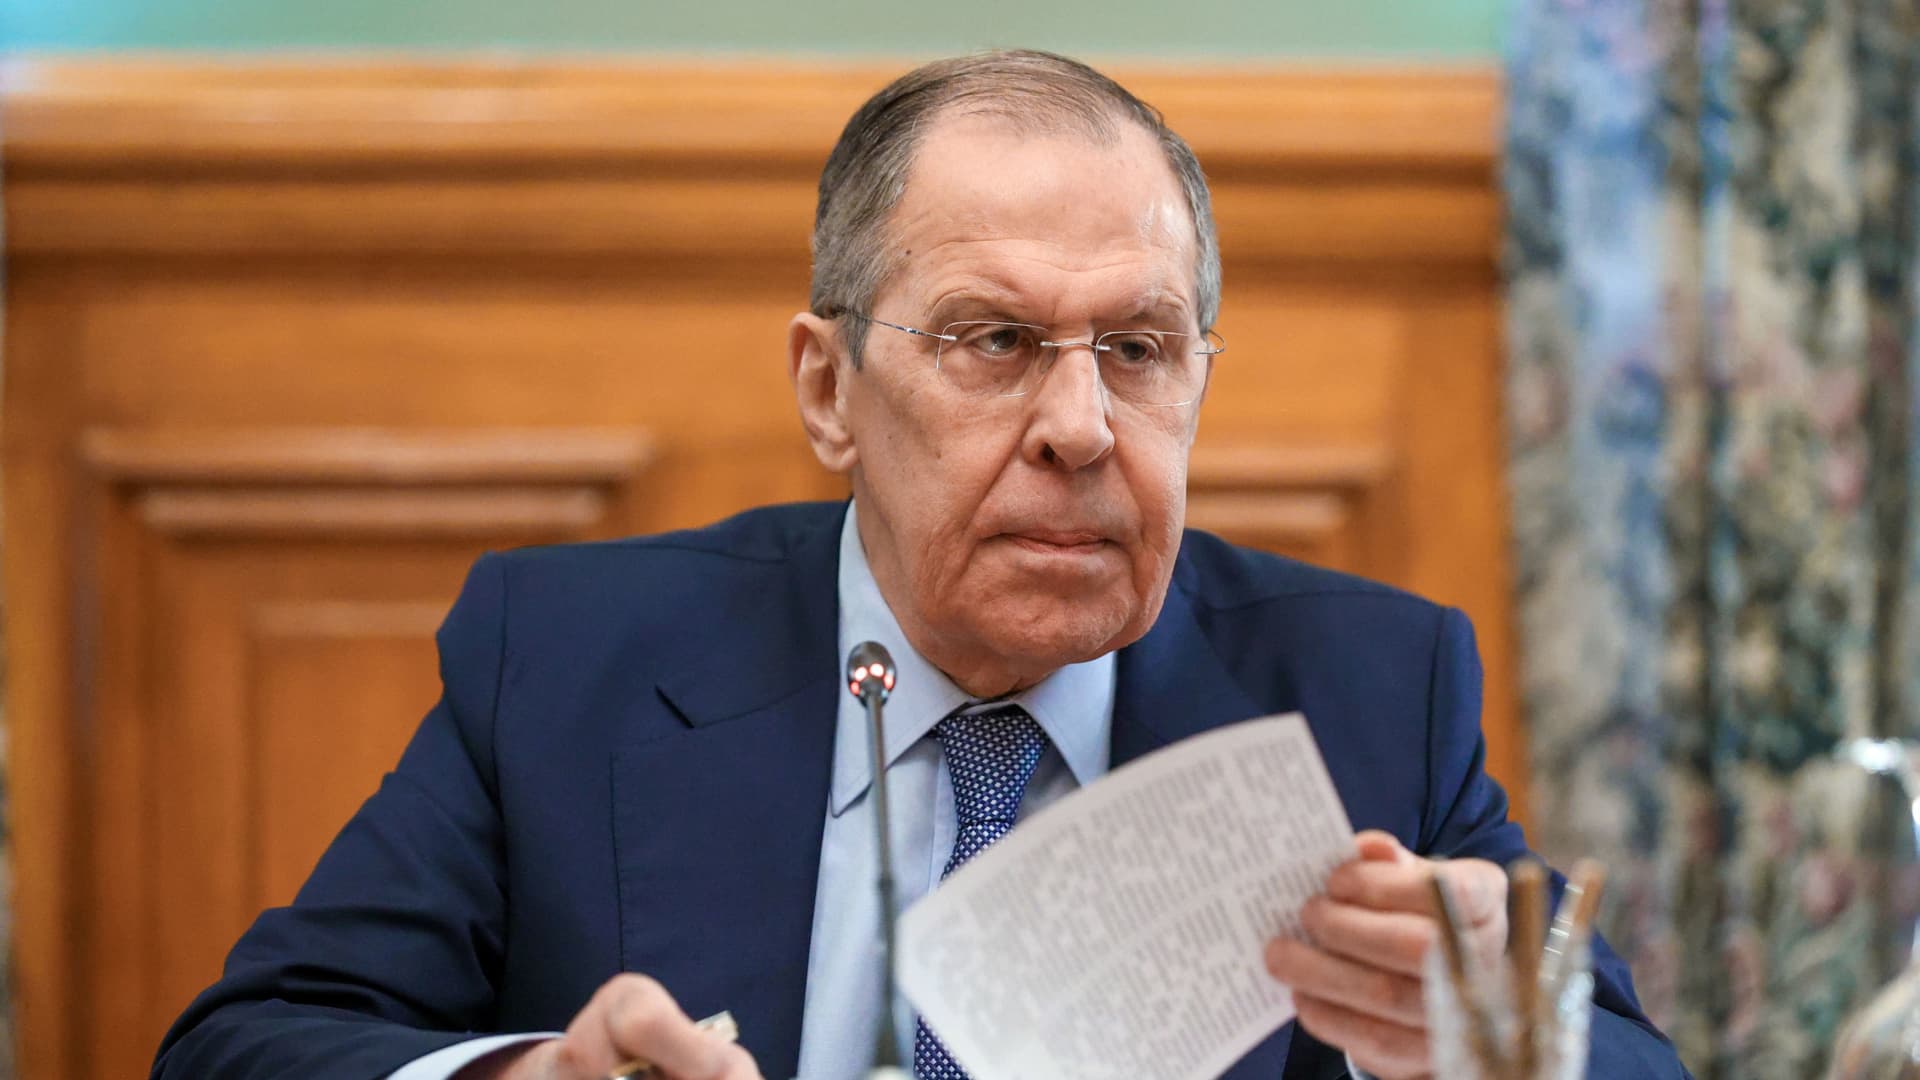 Russia's Foreign Minister Sergei Lavrov attends a meeting with Vladislav Deinego, head of the Foreign Ministry of the self-proclaimed Lugansk People's Republic, and Sergei Peresada, deputy head of the Foreign Ministry of the self-proclaimed Donetsk People's Republic, in Moscow, Russia February 25, 2022.